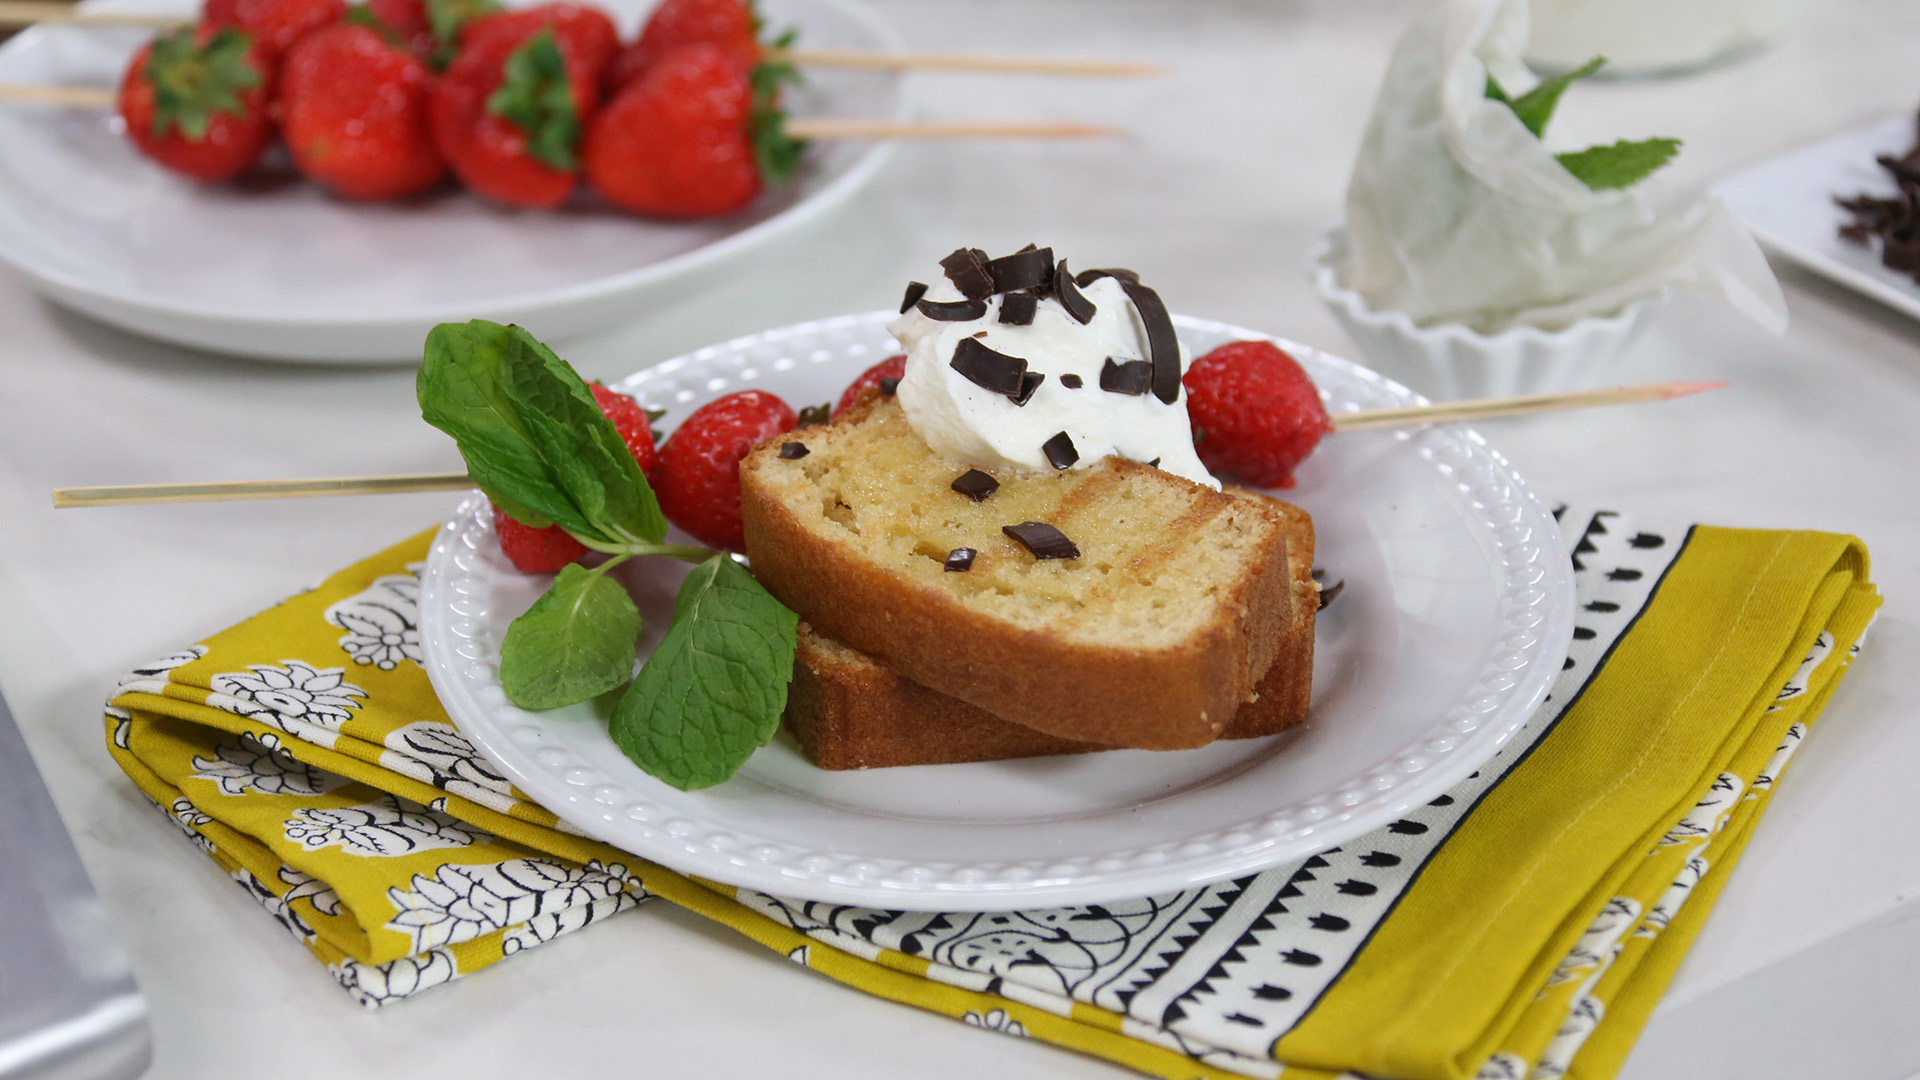 Grilled pound cake with strawberries and cream